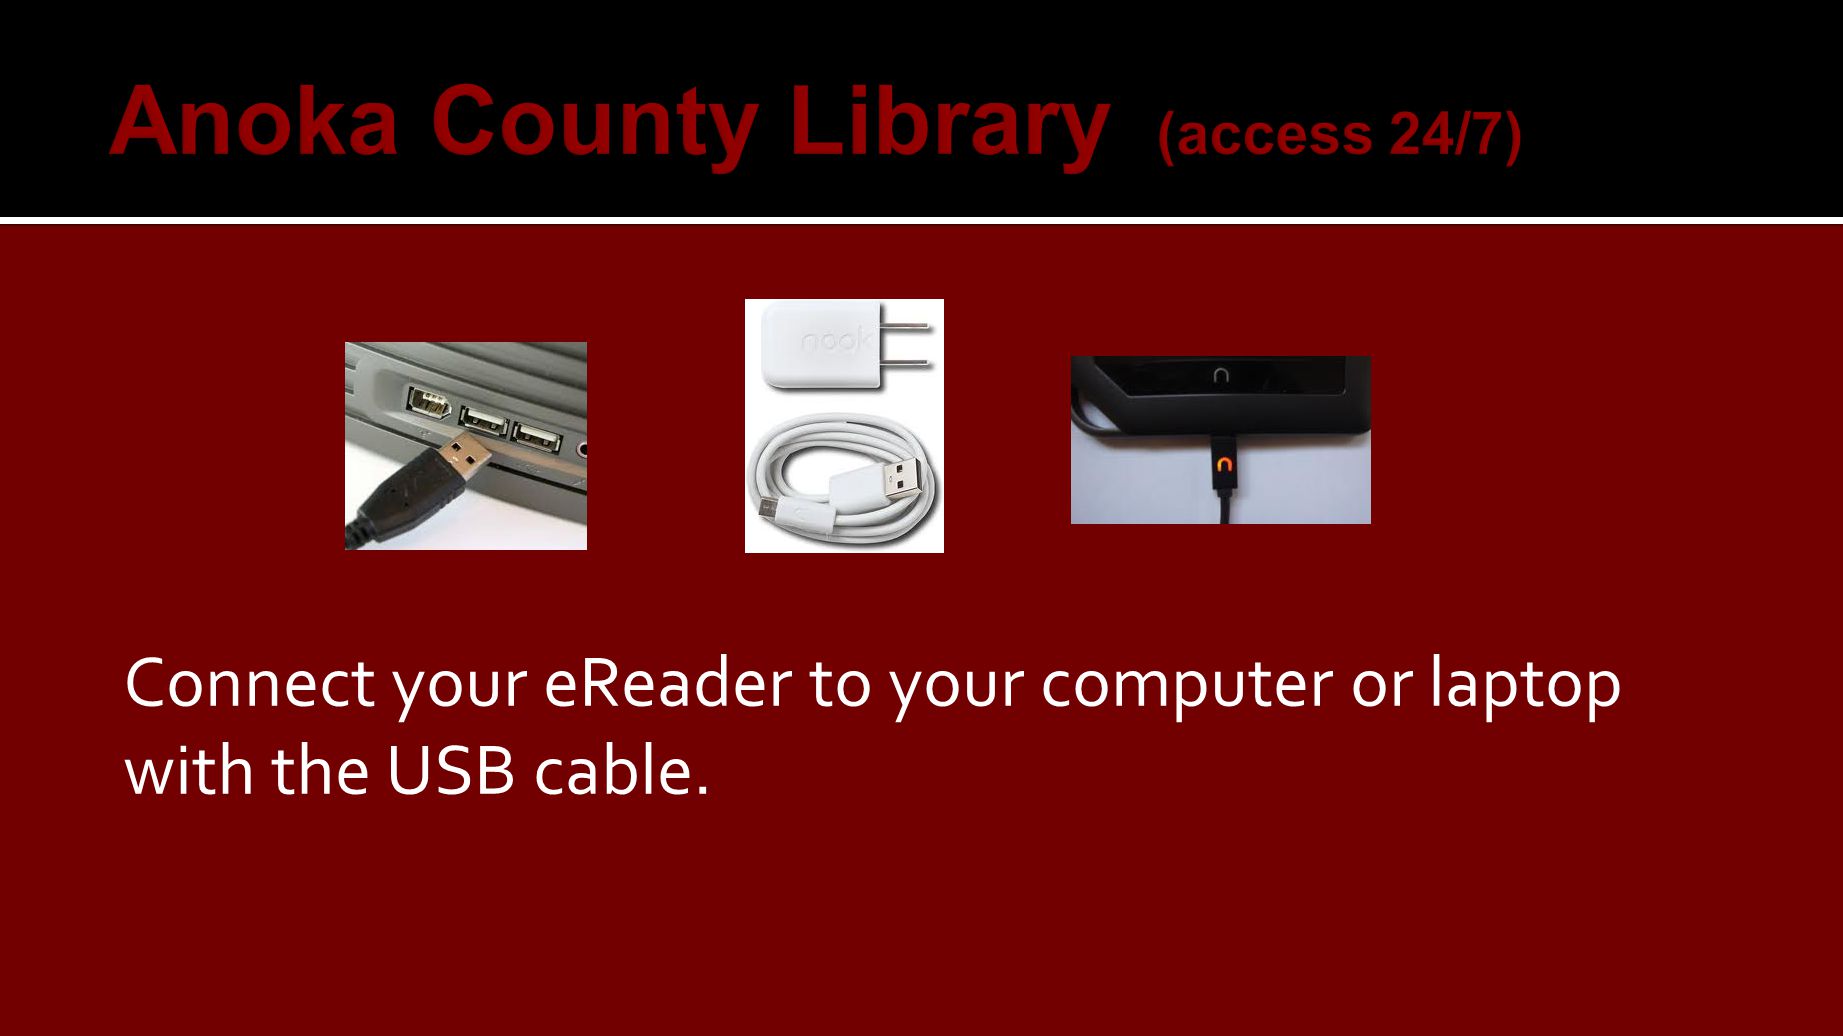 Connect your eReader to your computer or laptop with the USB cable.